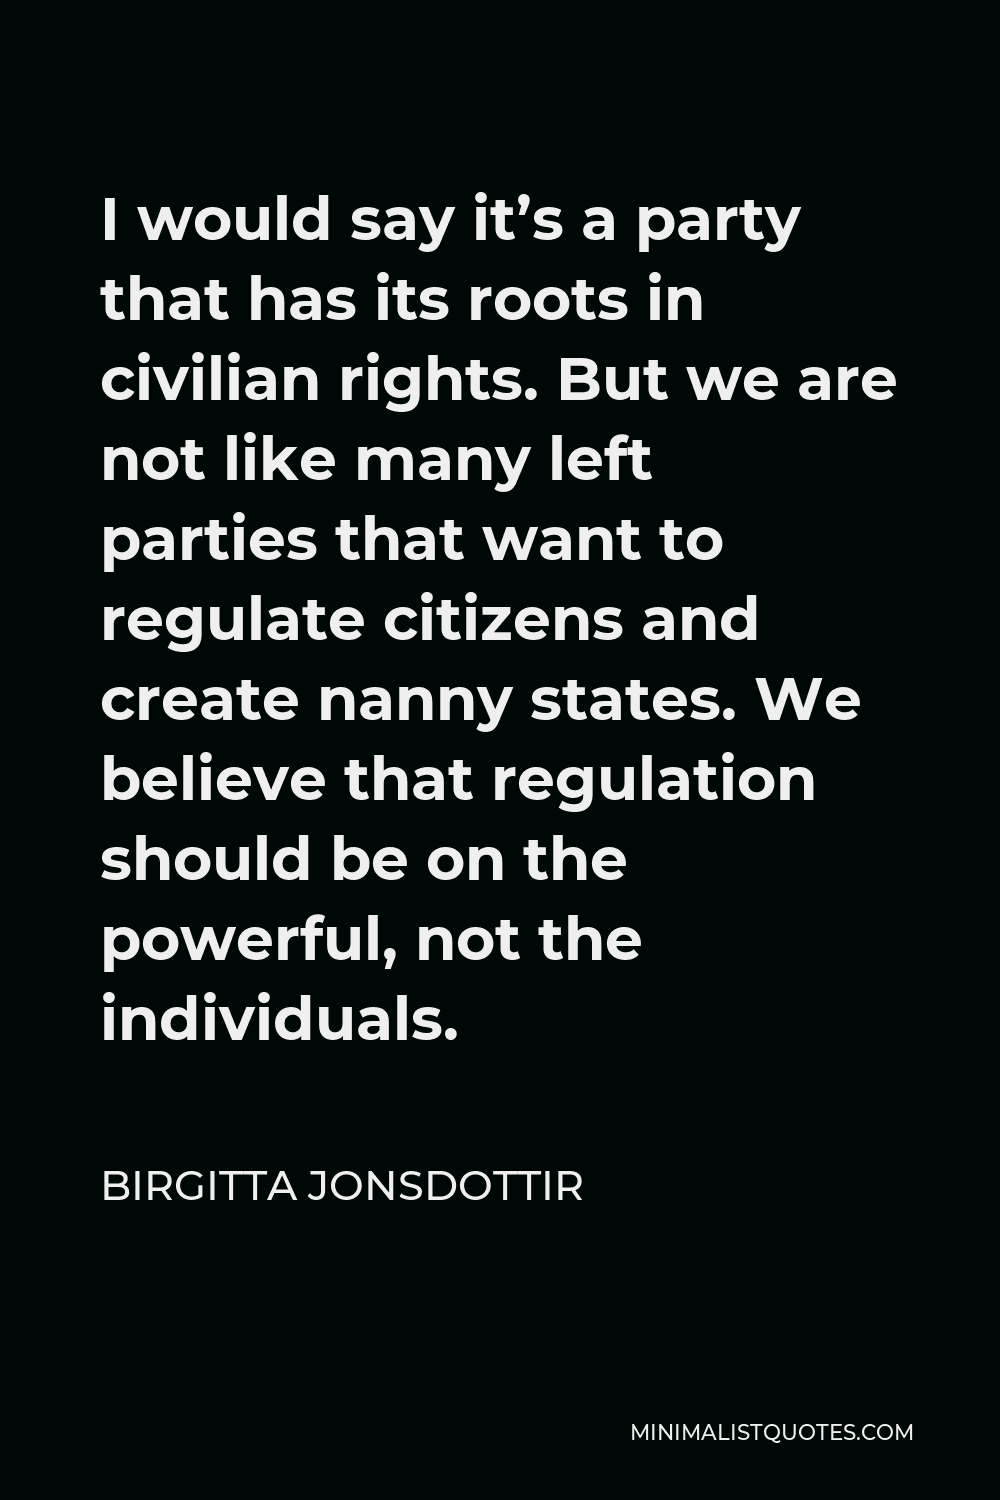 Birgitta Jonsdottir Quote - I would say it’s a party that has its roots in civilian rights. But we are not like many left parties that want to regulate citizens and create nanny states. We believe that regulation should be on the powerful, not the individuals.